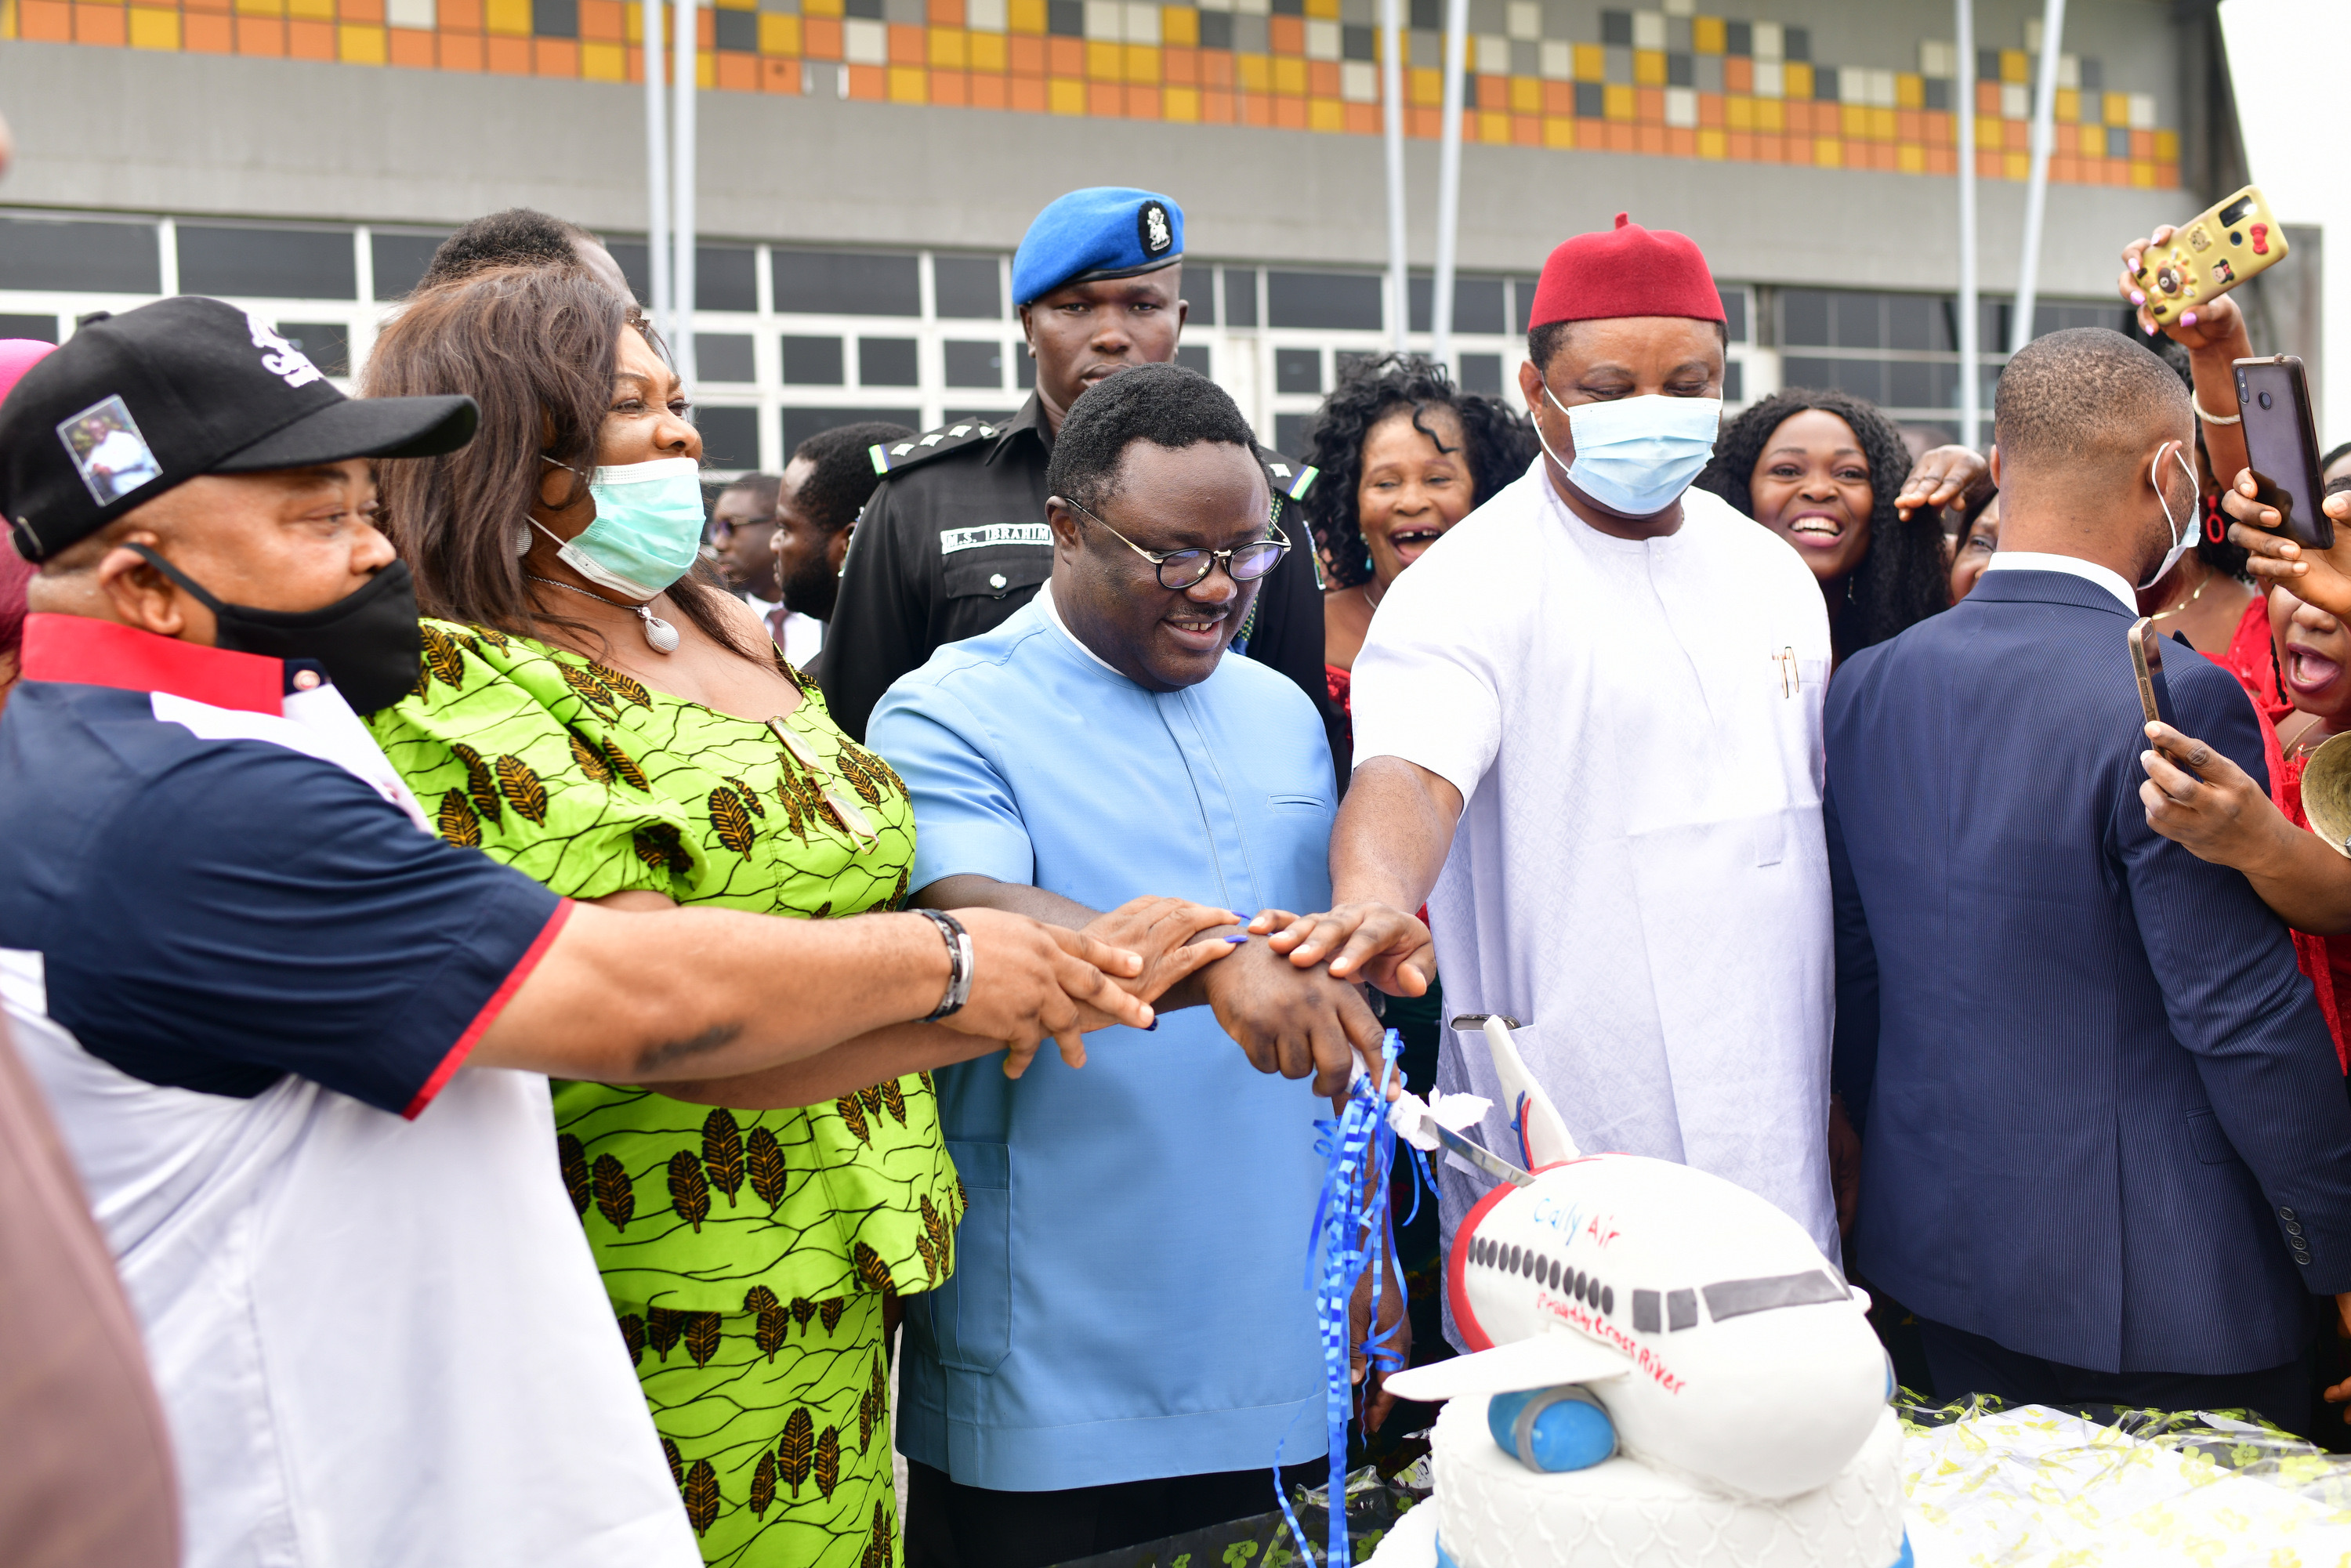 Cross River State Governor Sir Ben Ayade, (2nd R), his Chief of Staff, Hon. Martins Orim (1st R), the Secretary to State Government, Barr. Tina Agbor (2nd L) and the Commissioner for Aviation, RT Hon. Jake Otu Enya (1st R) in a symbolic cutting of cake to welcome Cally aircraft to the Margaret Ekpo International airport, Calabar - Monday (Credit: GHPC/Daniel Williams)